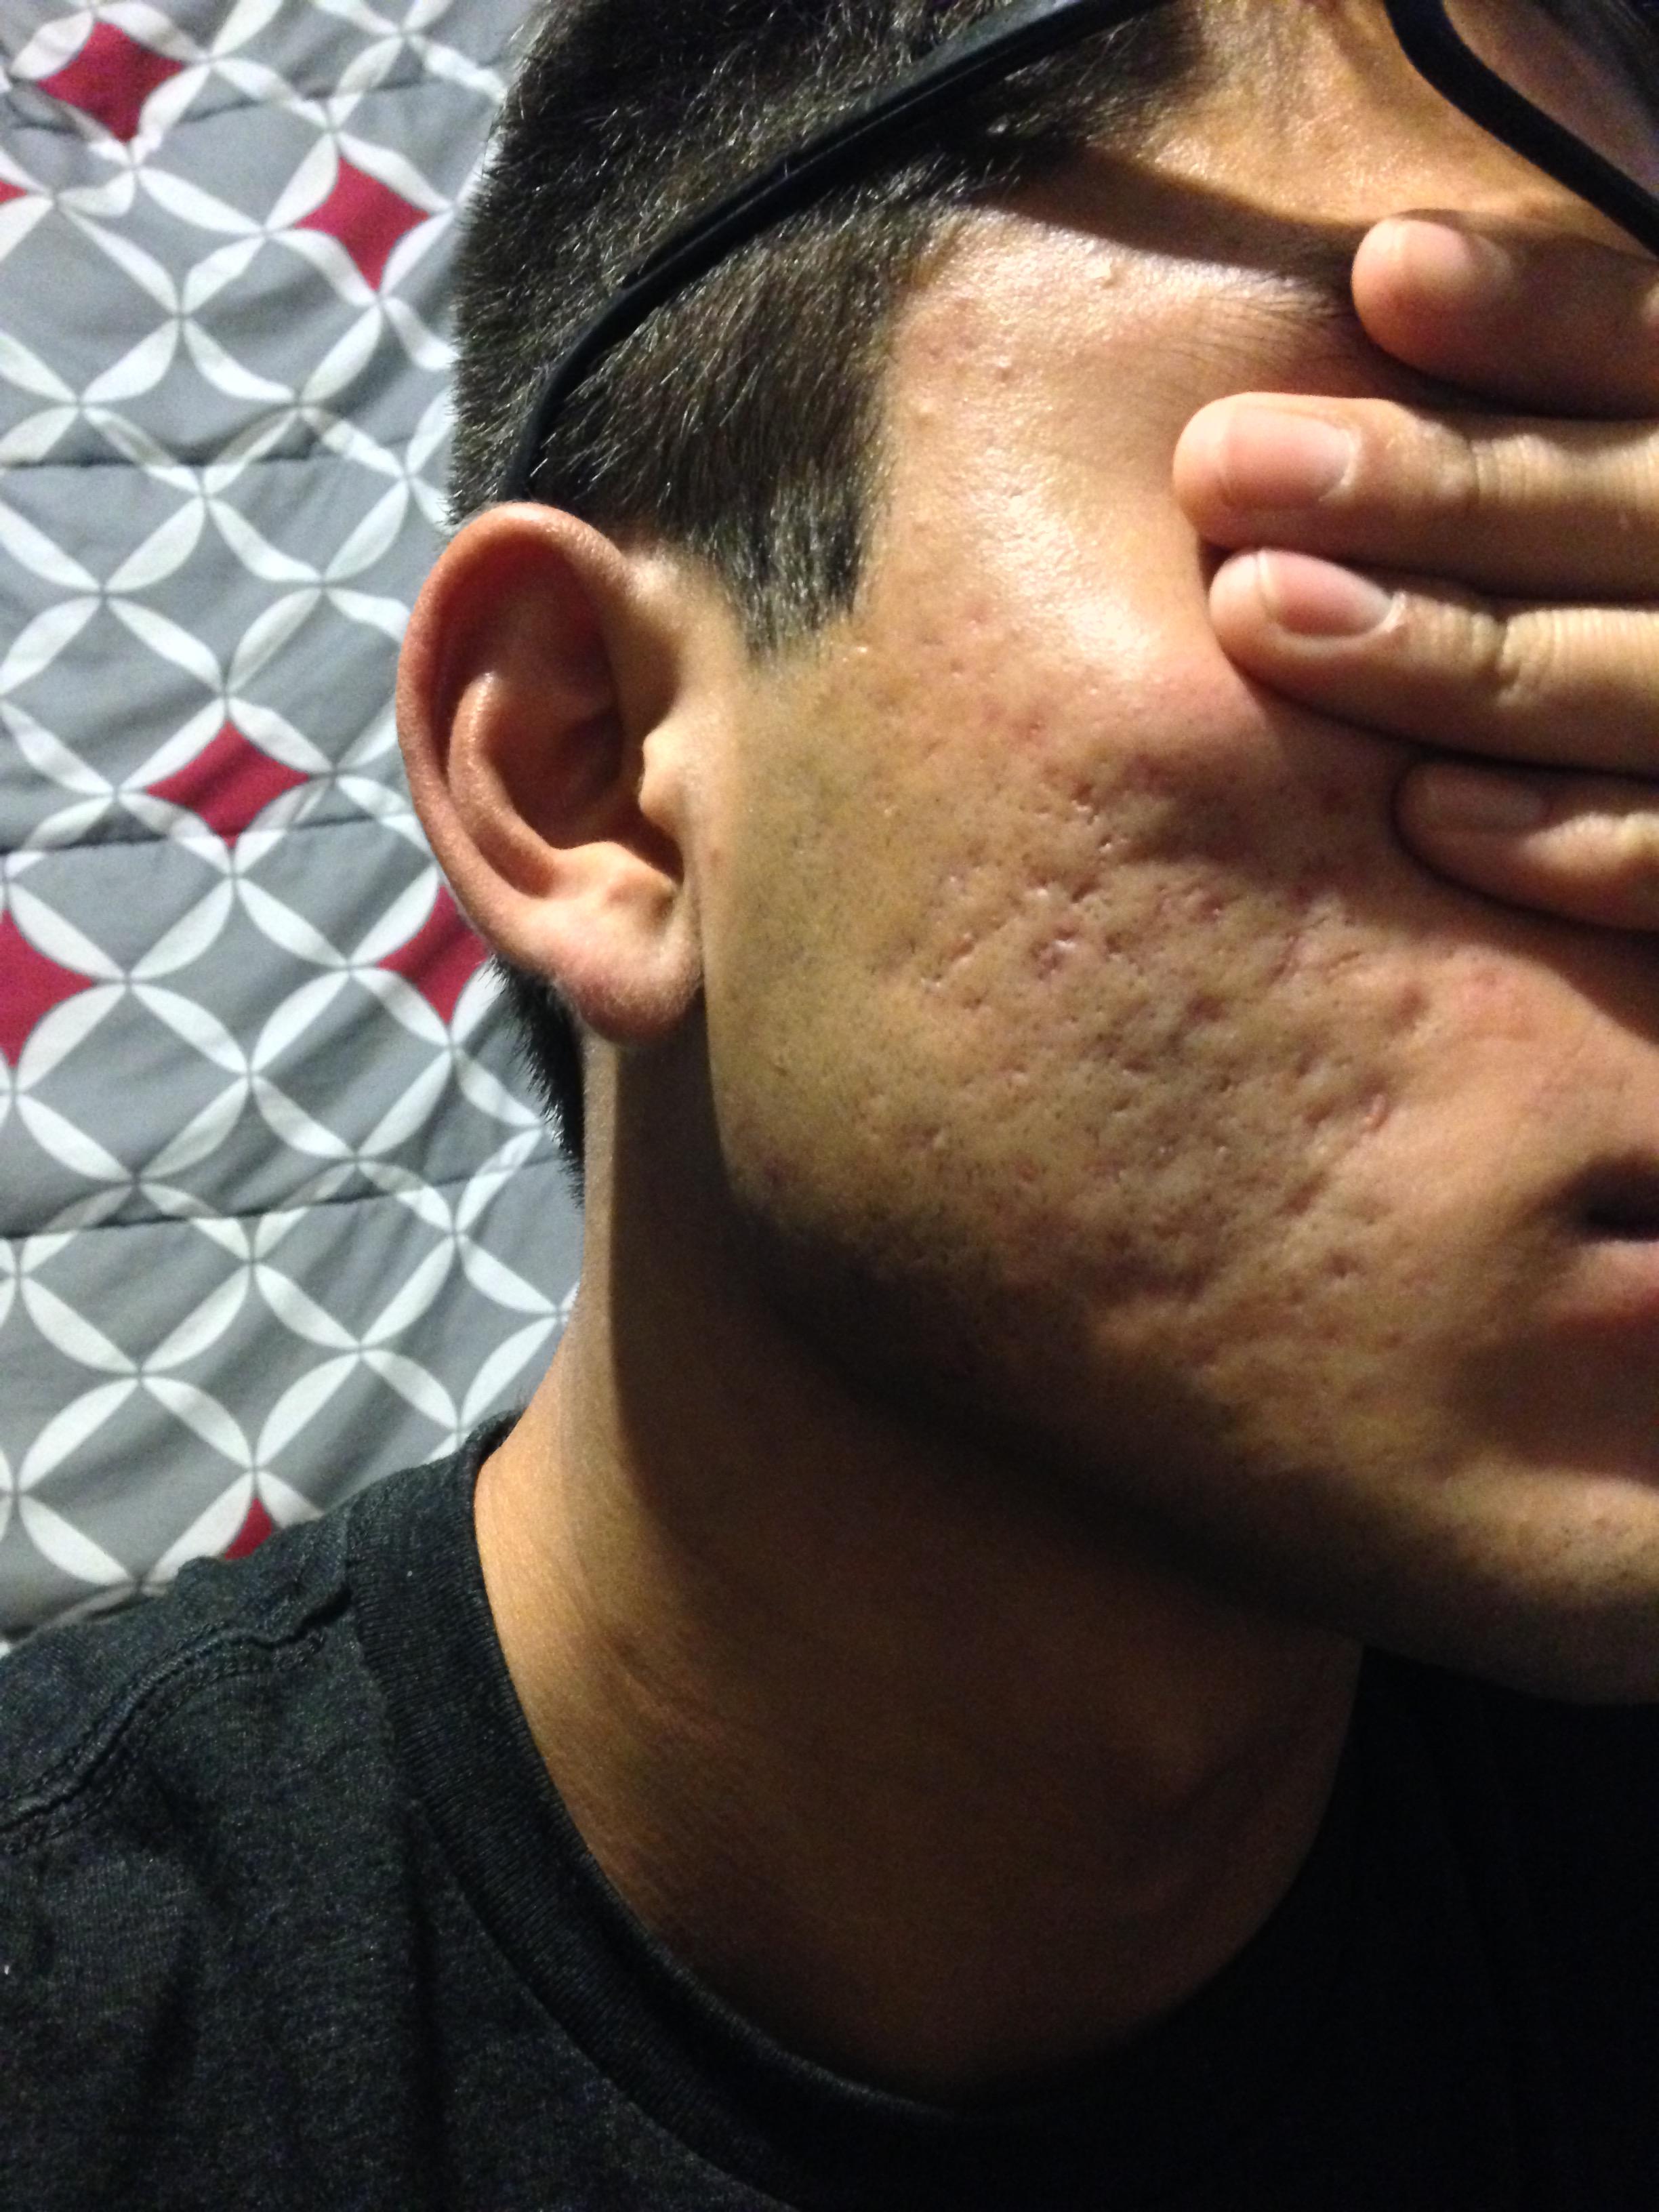 Please help with acne scars (Pics) - Scar treatments - Acne.org